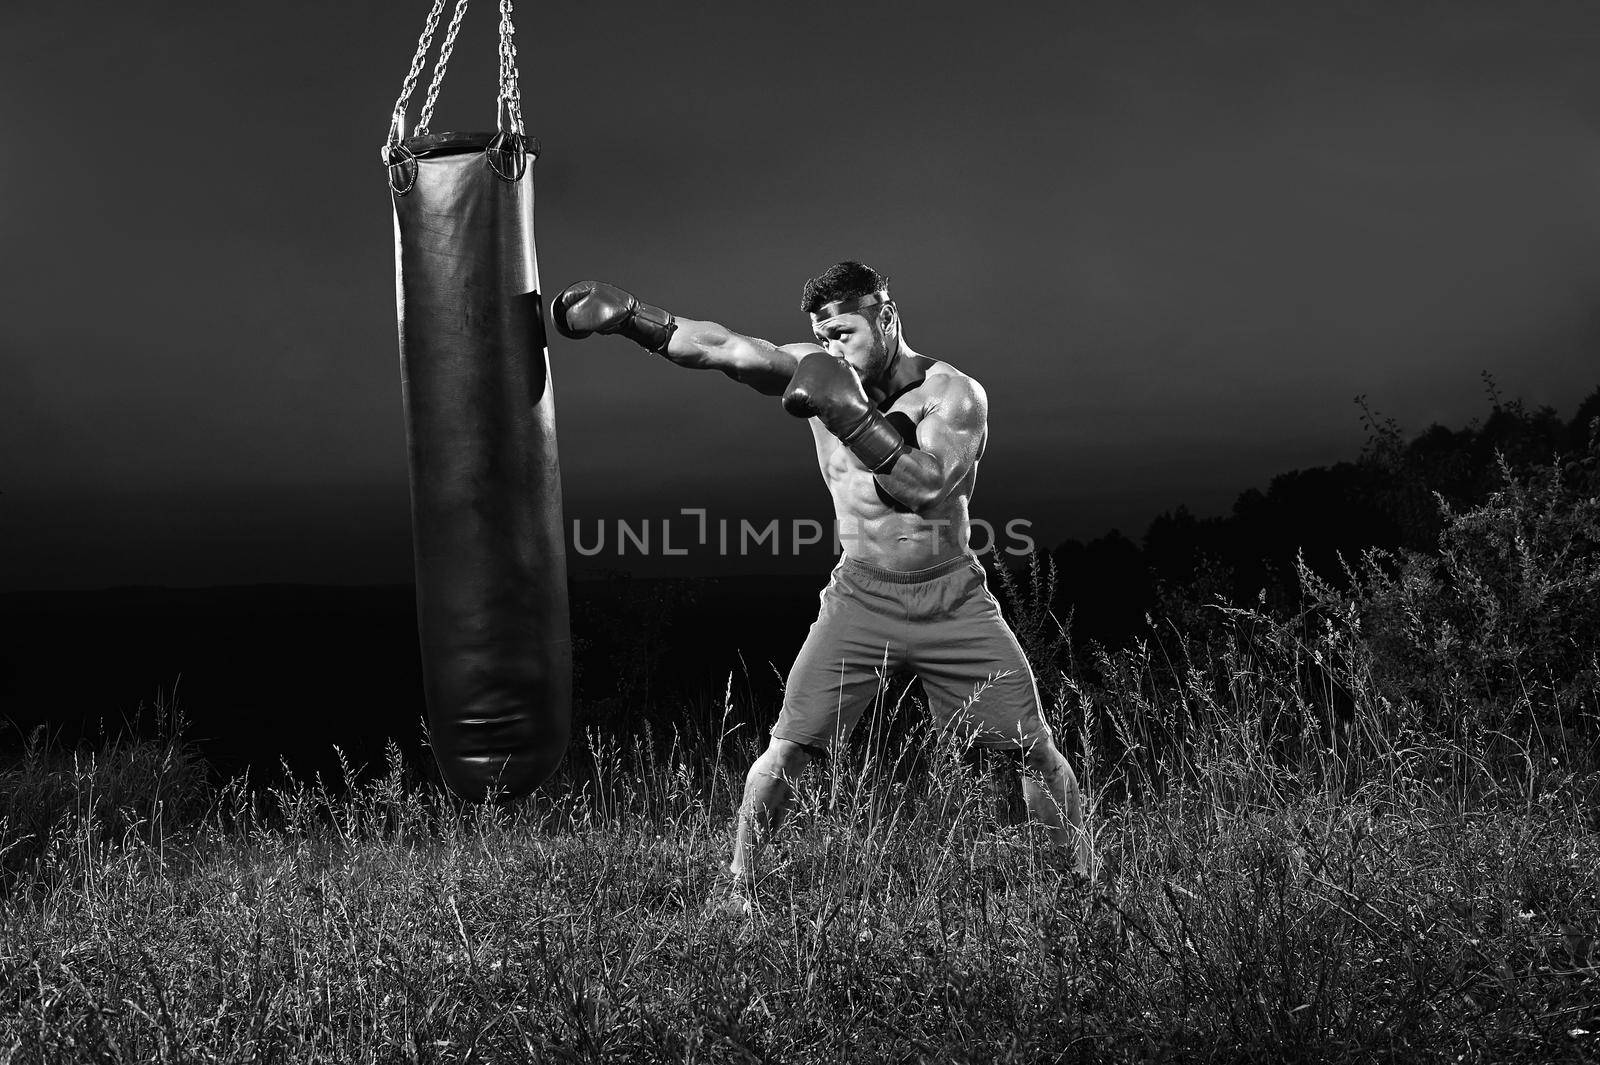 Monochrome shots of a male boxer training with a punching bag ou by SerhiiBobyk